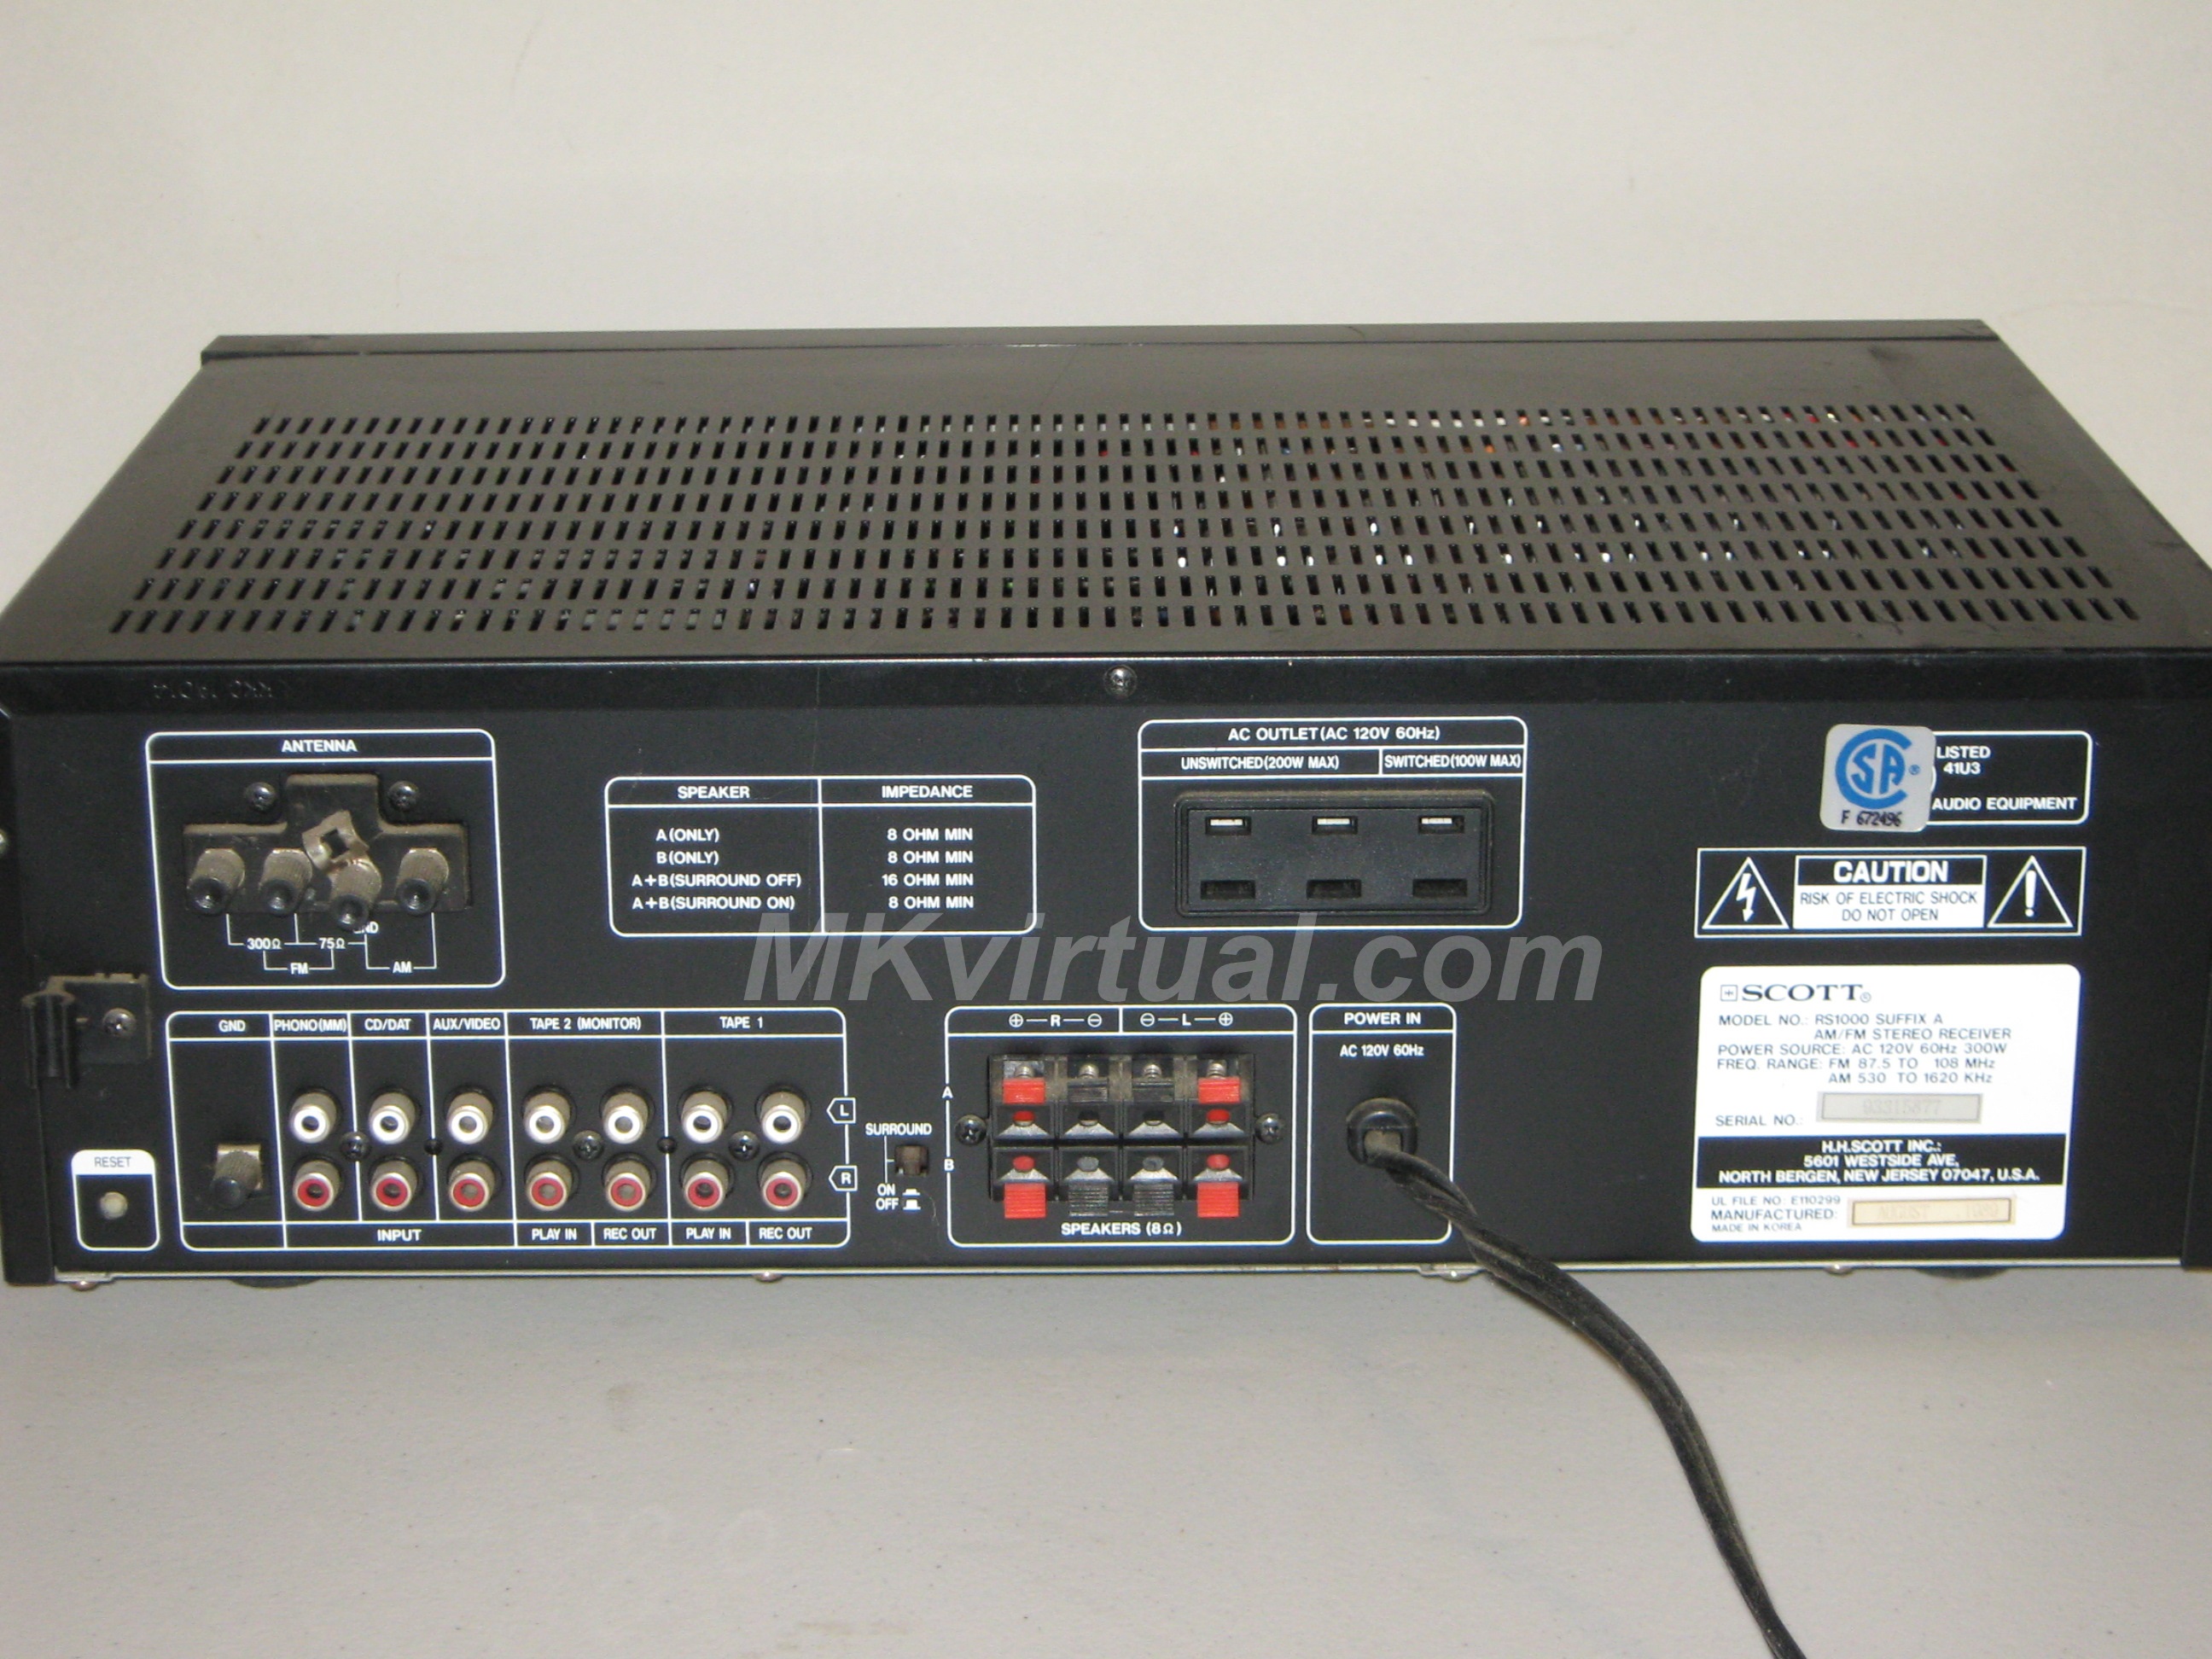 Scott RS-1000 receiver rear view